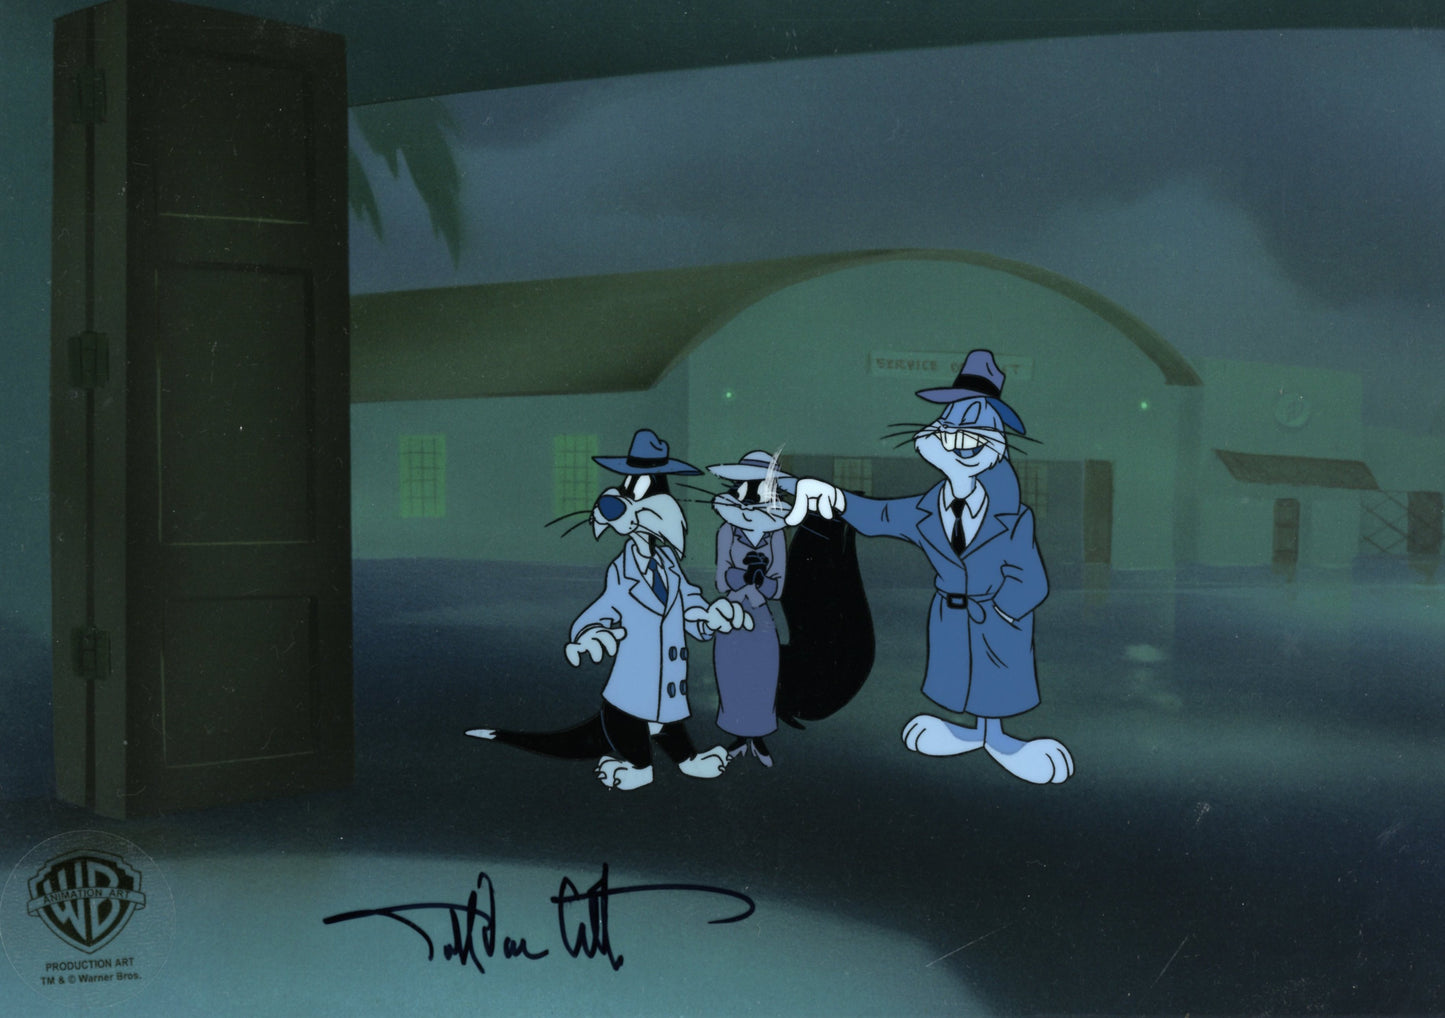 Looney Tunes Original Production Cel Signed By Darrell Van Citters: Bugs Bunny, Sylvester, Penelope